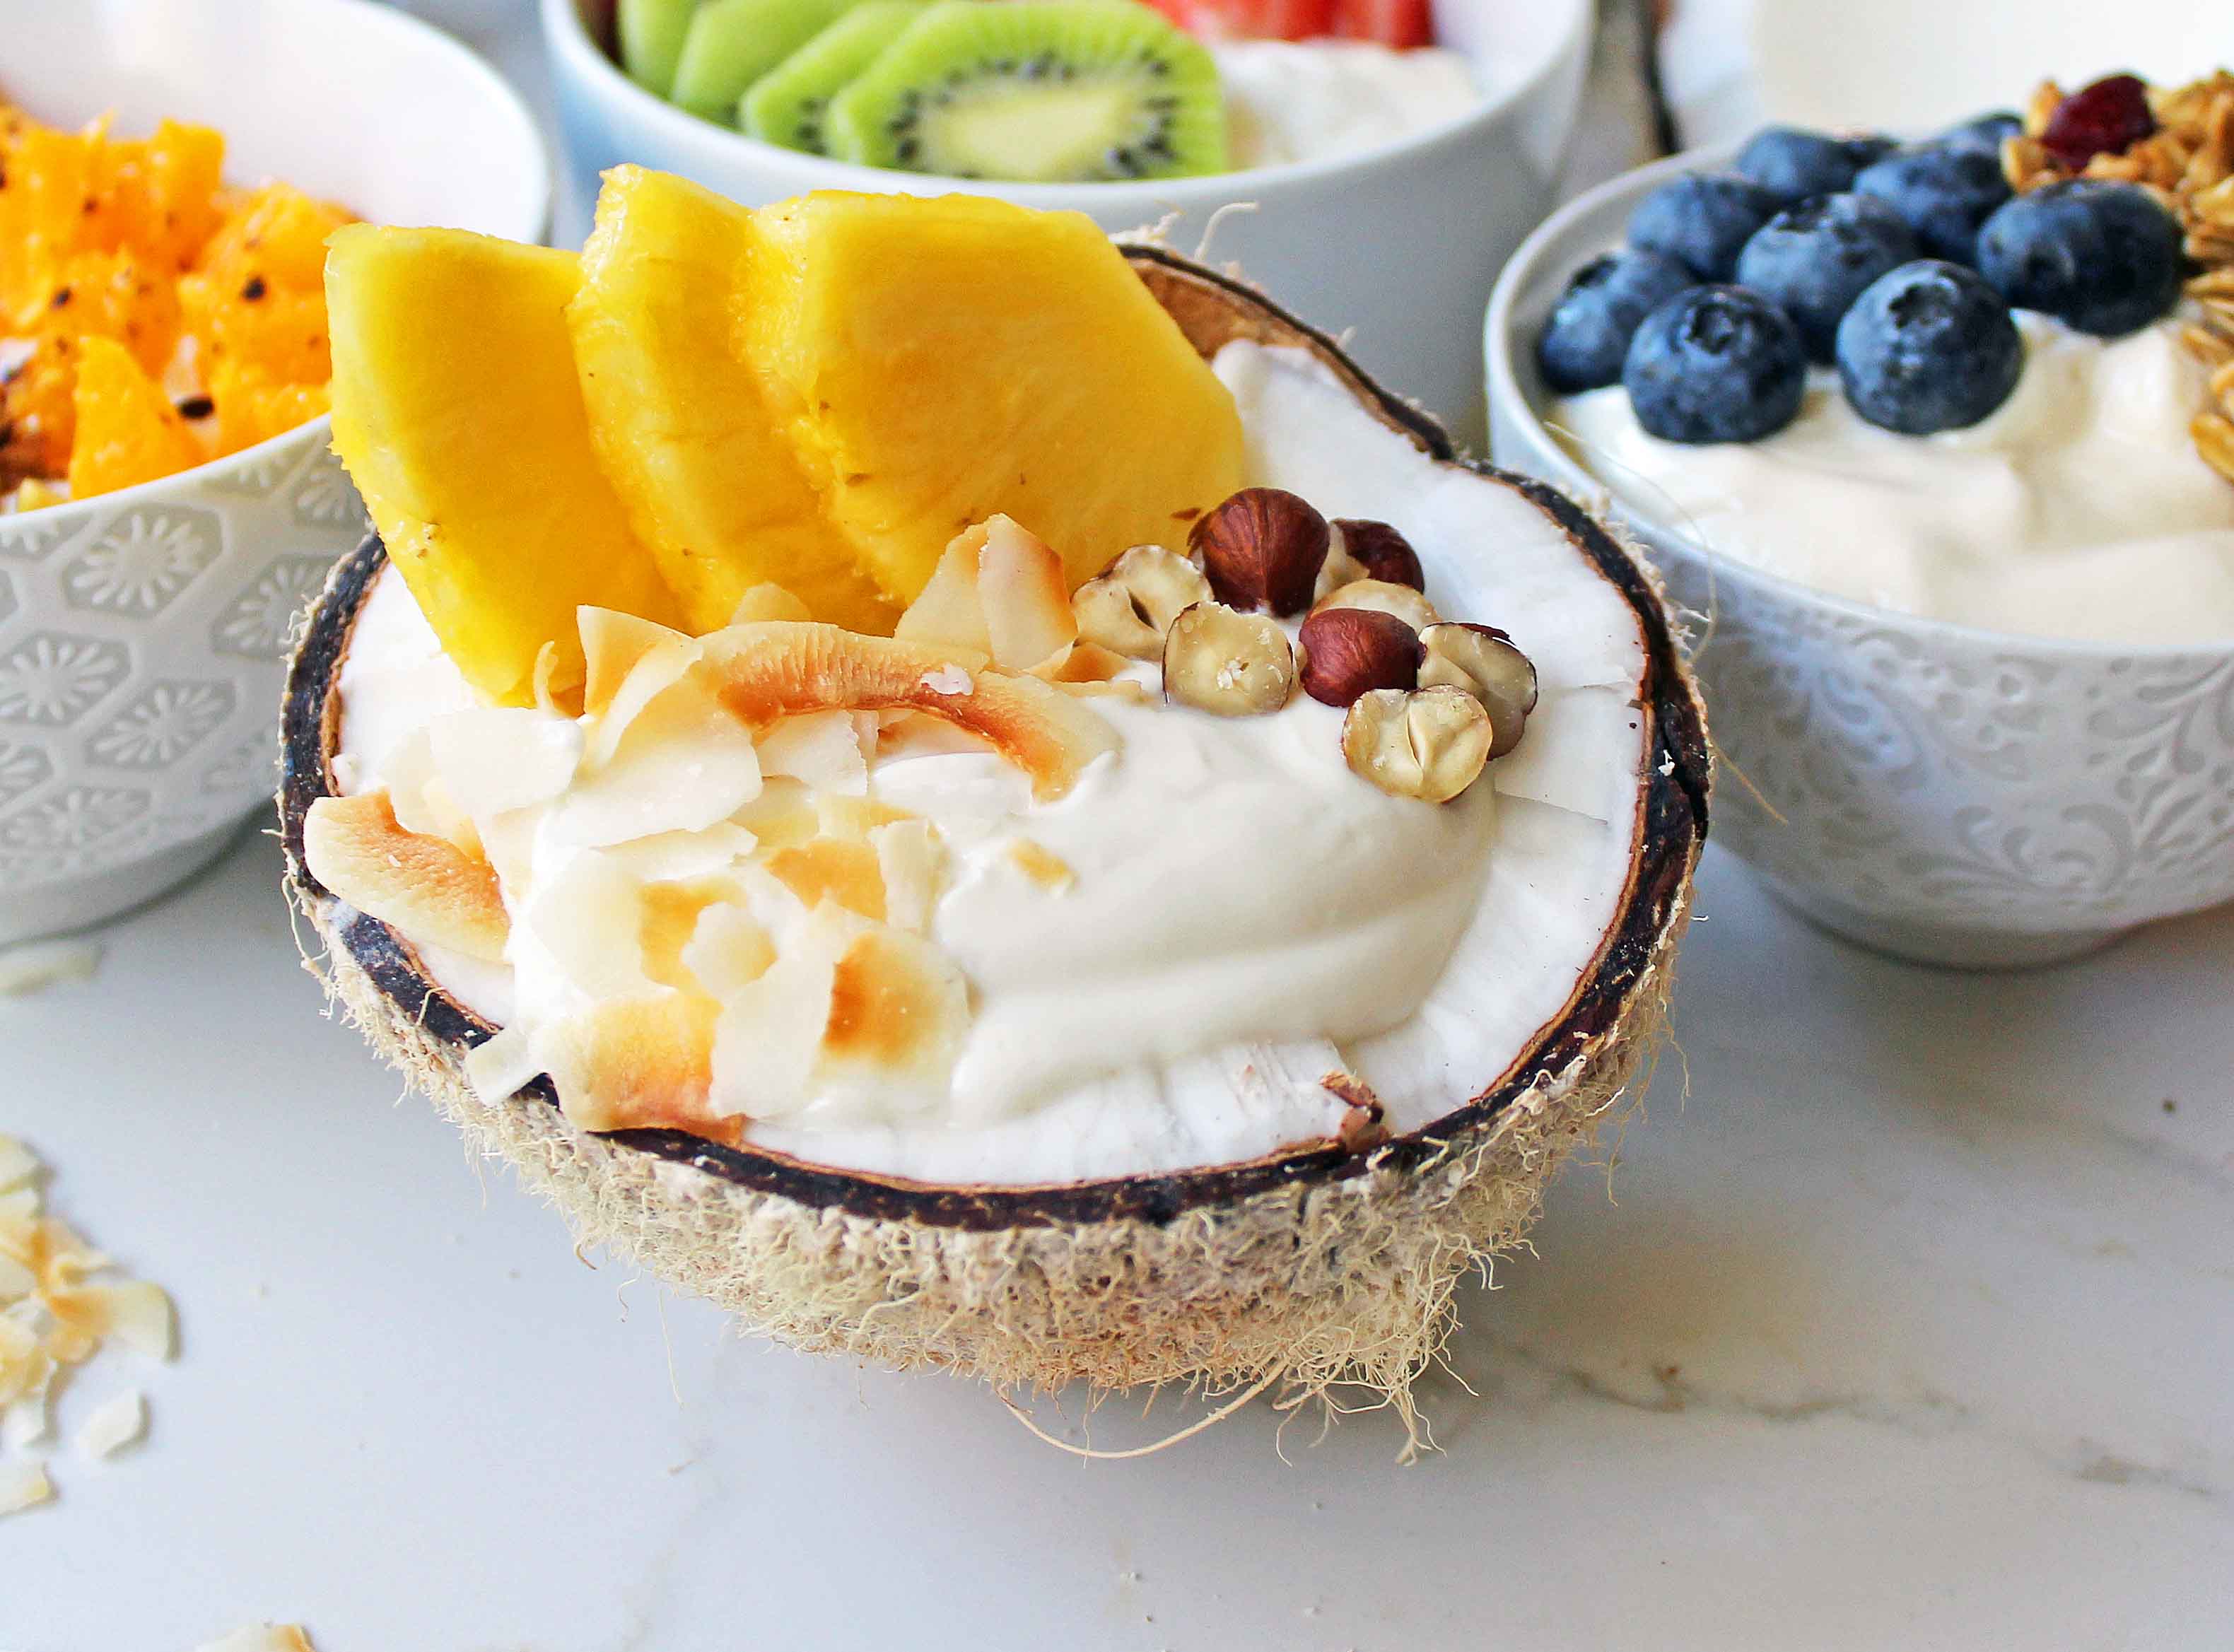 Healthy Yogurt Bowl Recipe with 17 Topping Ideas - Live Simply